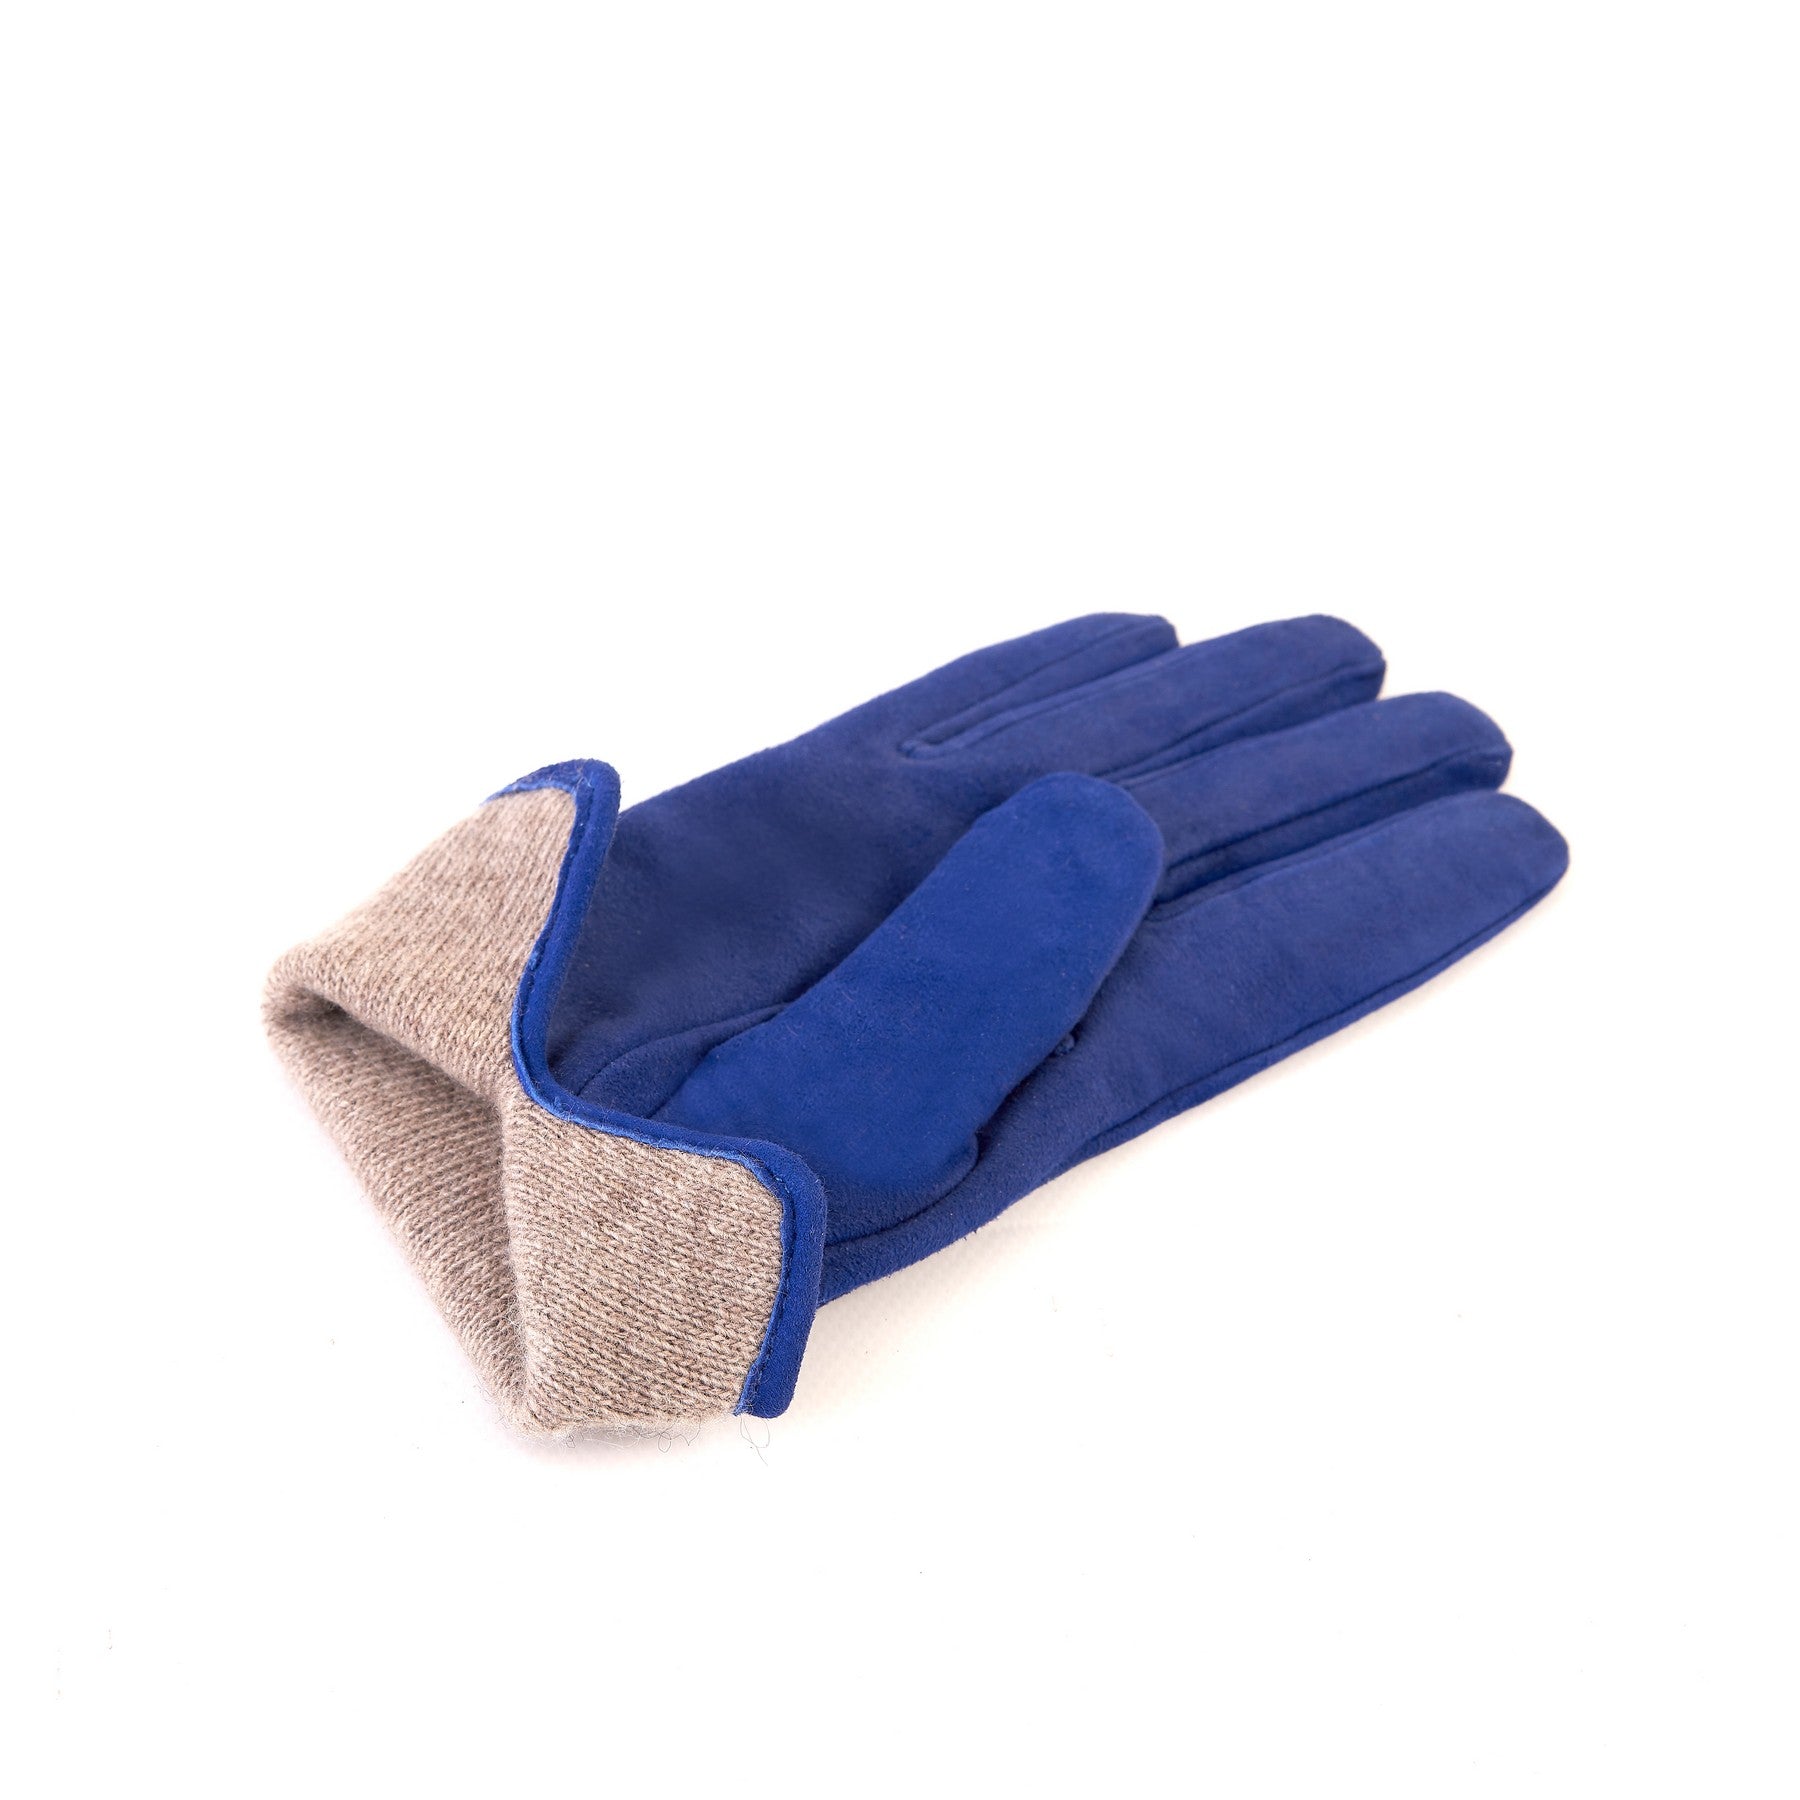 Women’s basic electric blue suede leather gloves with palm opening and mix cashmere lining